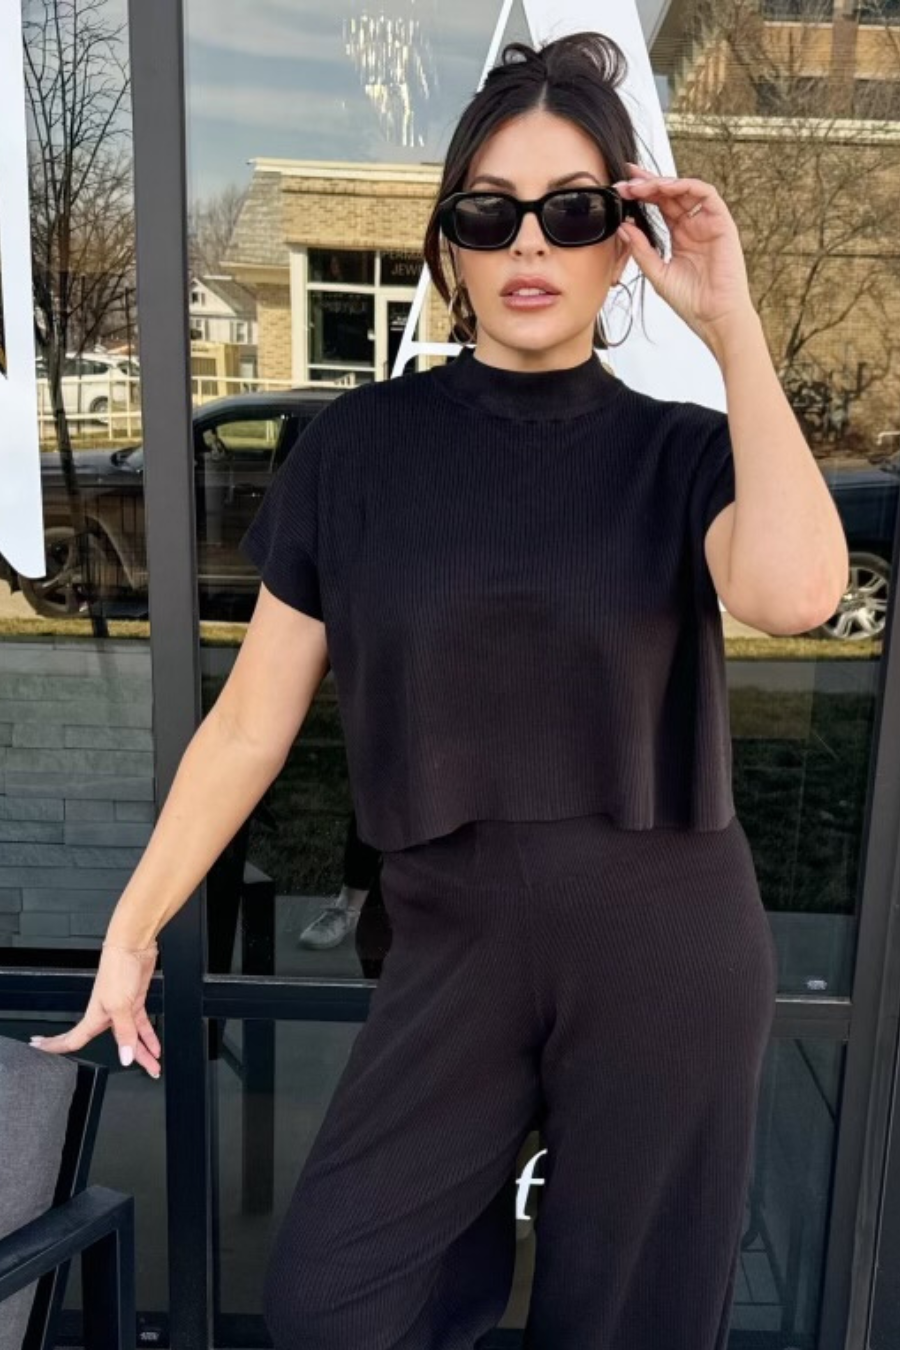 girl wearing sunglasses and the ribbed knit sweater top with matching pants.